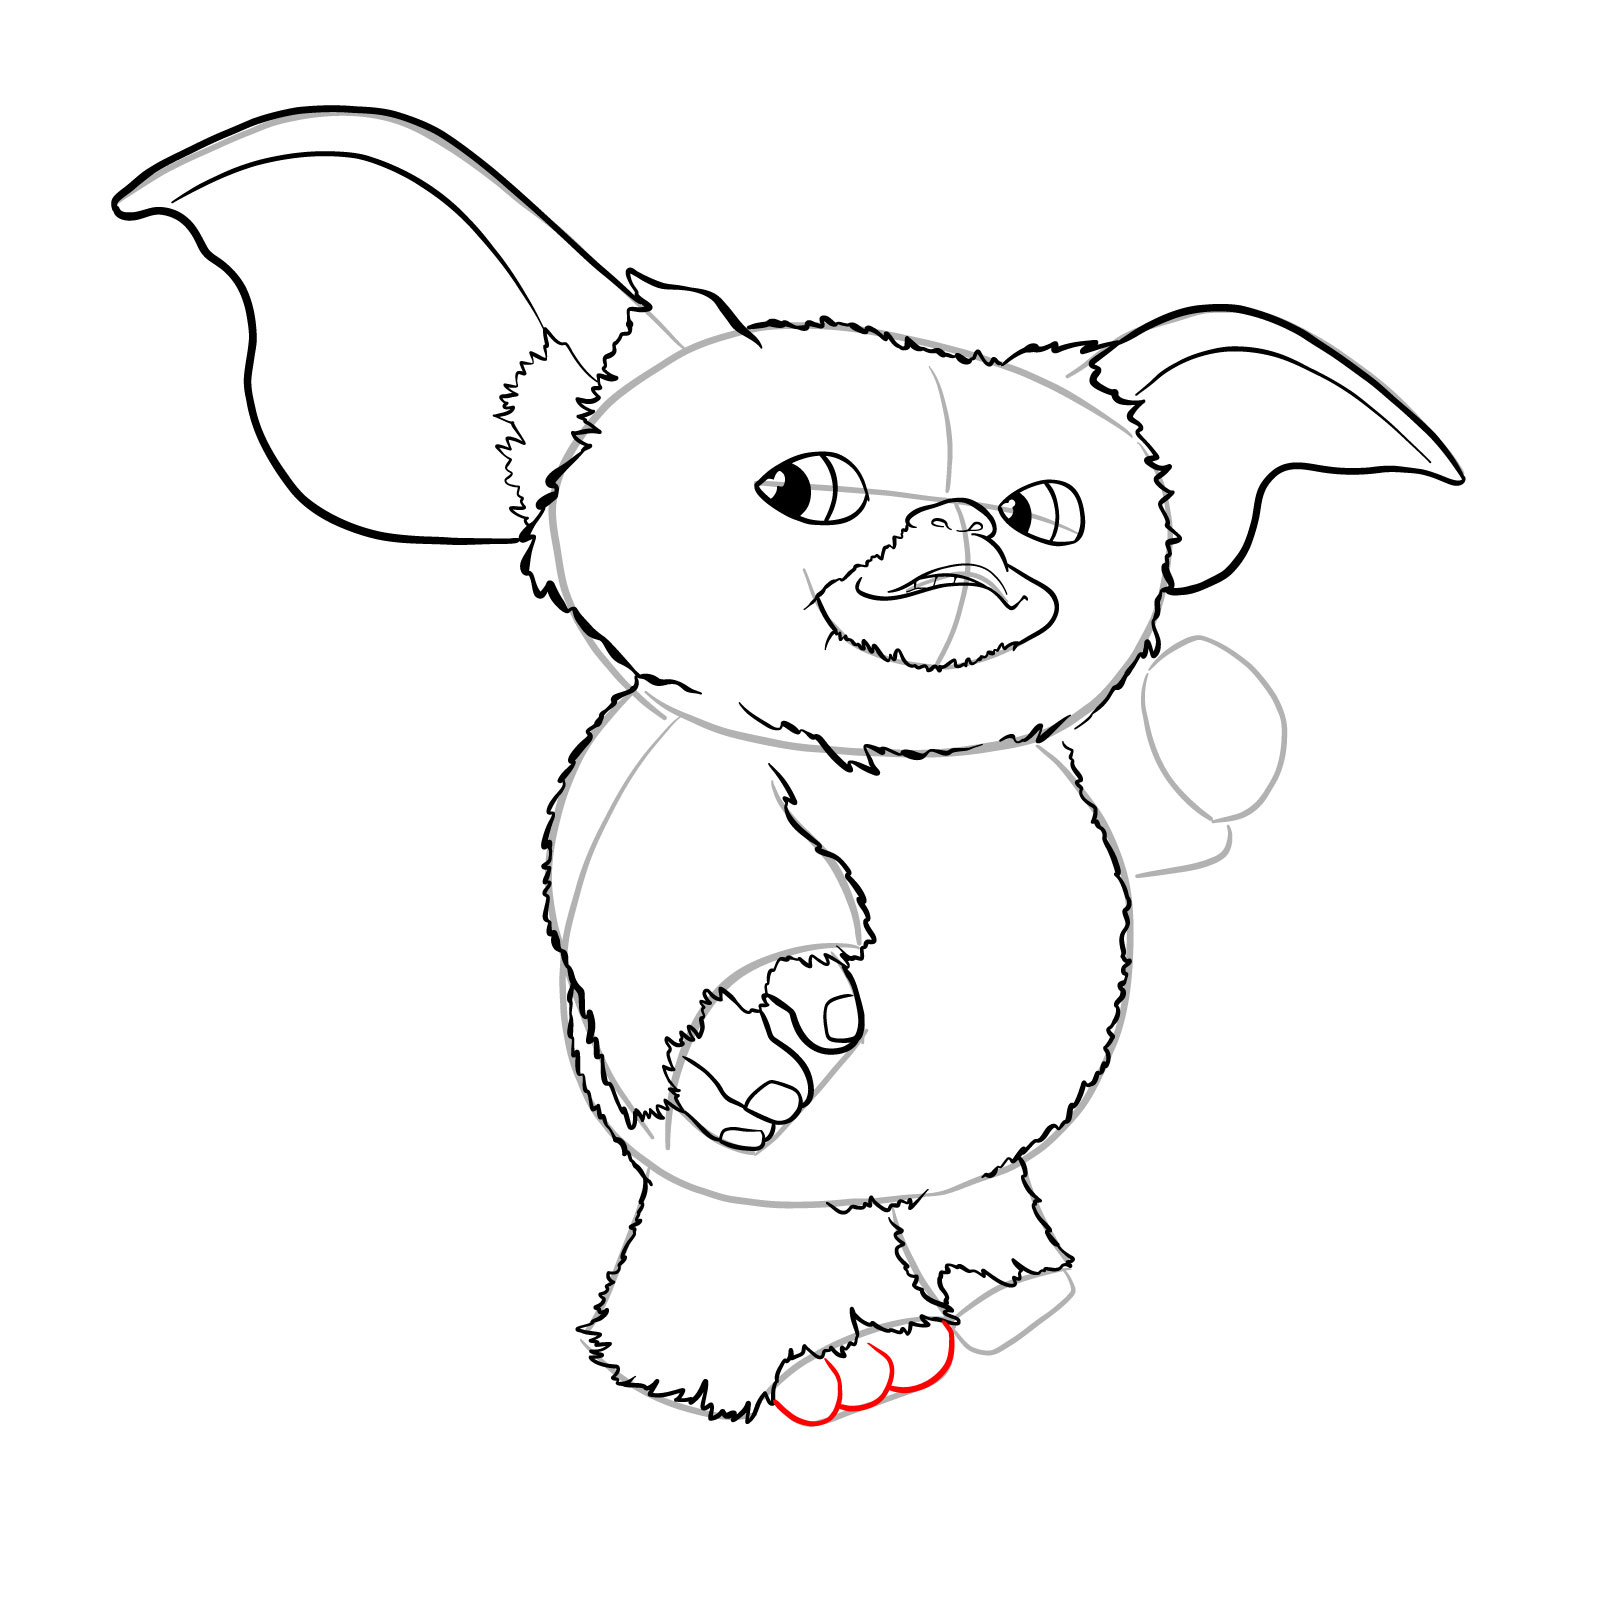 How to draw a Gremlin - step 23